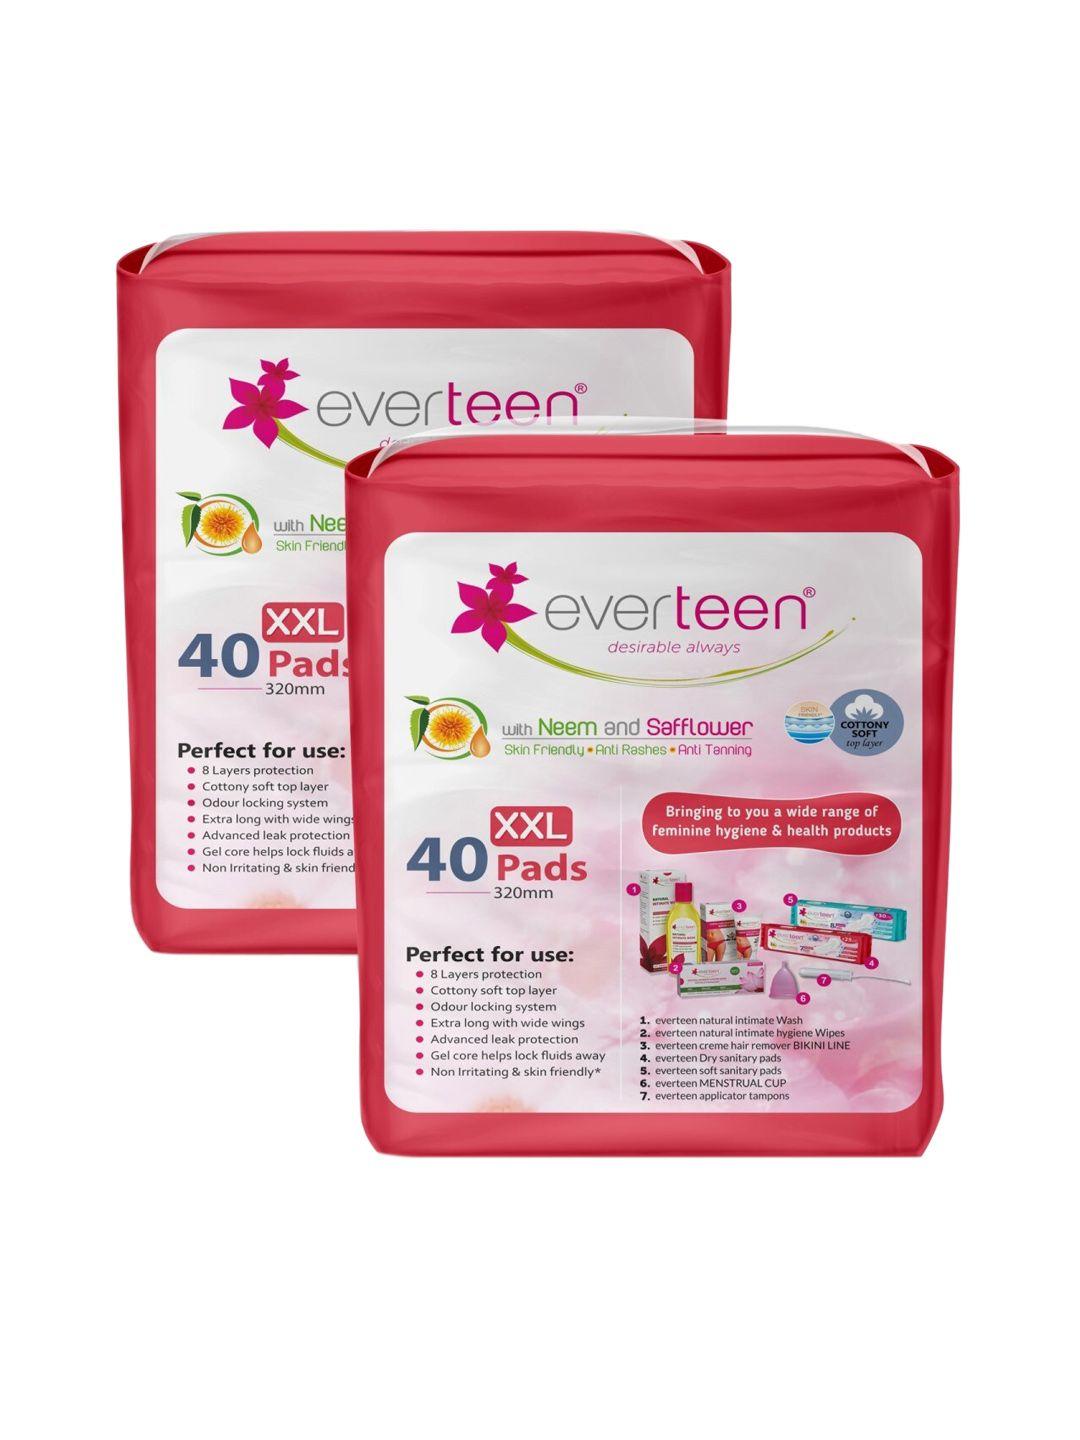 everteen set of 2 xxl sanitary napkin pads with soft top layer - 40 pads each